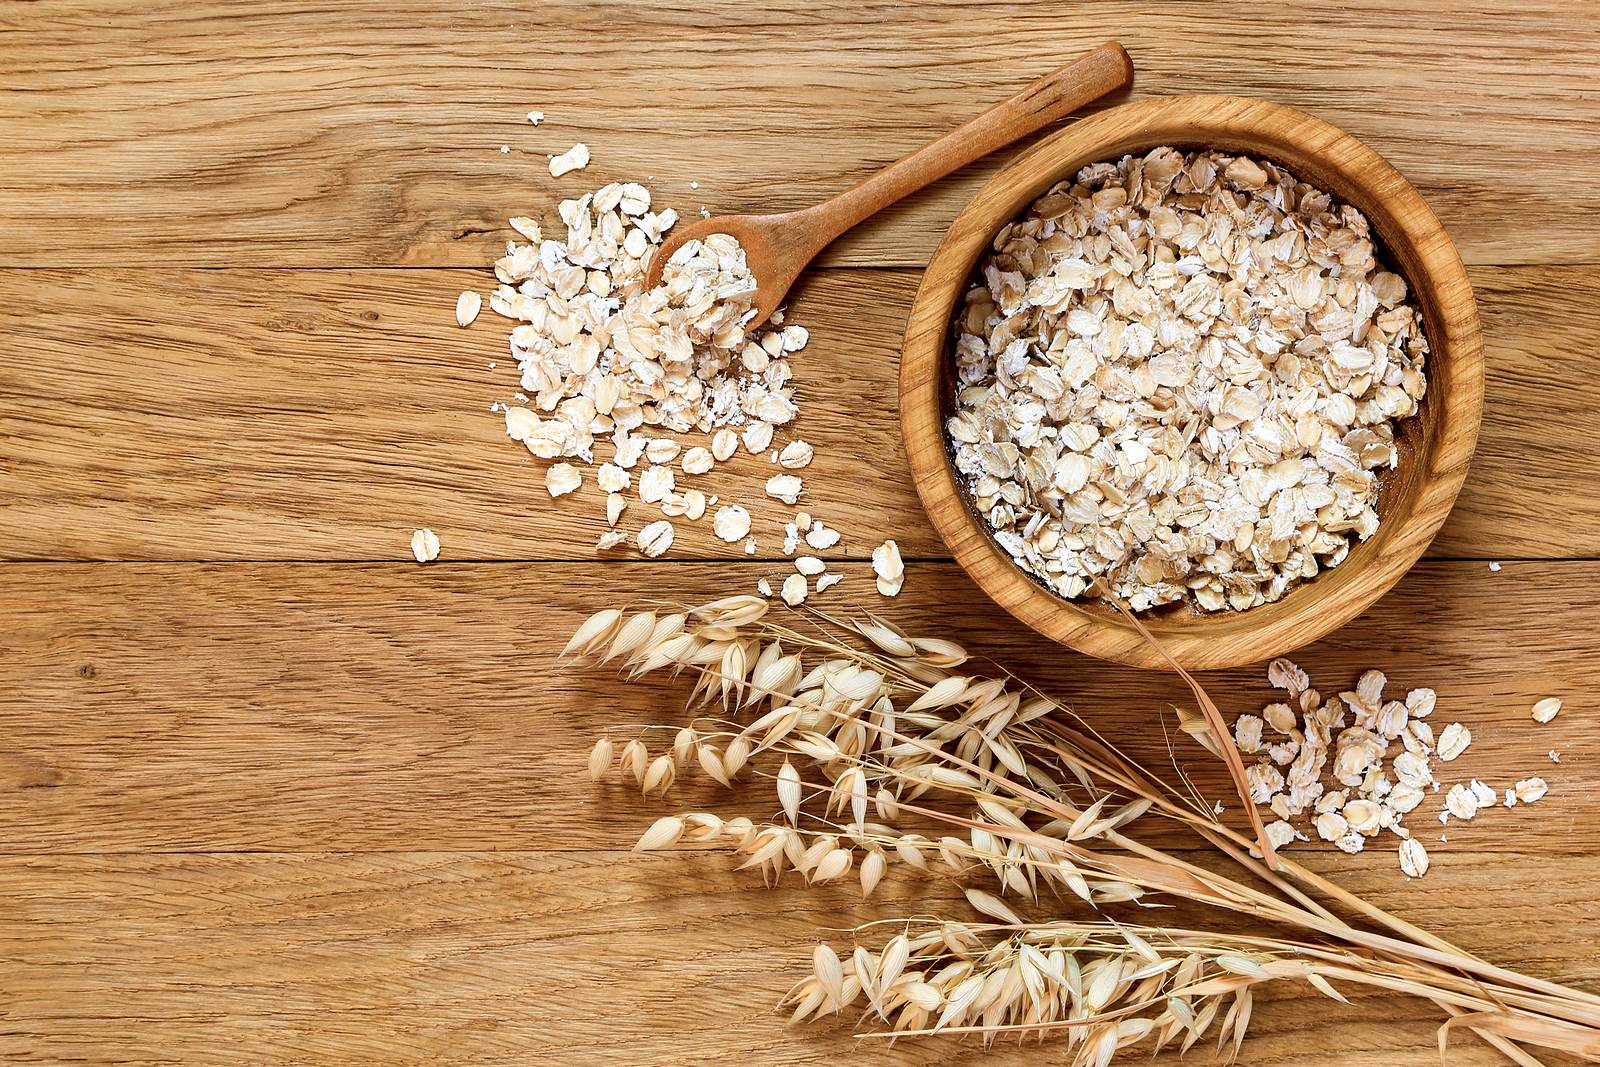 Your protein smoothie needs oats for slow-digesting carbs.